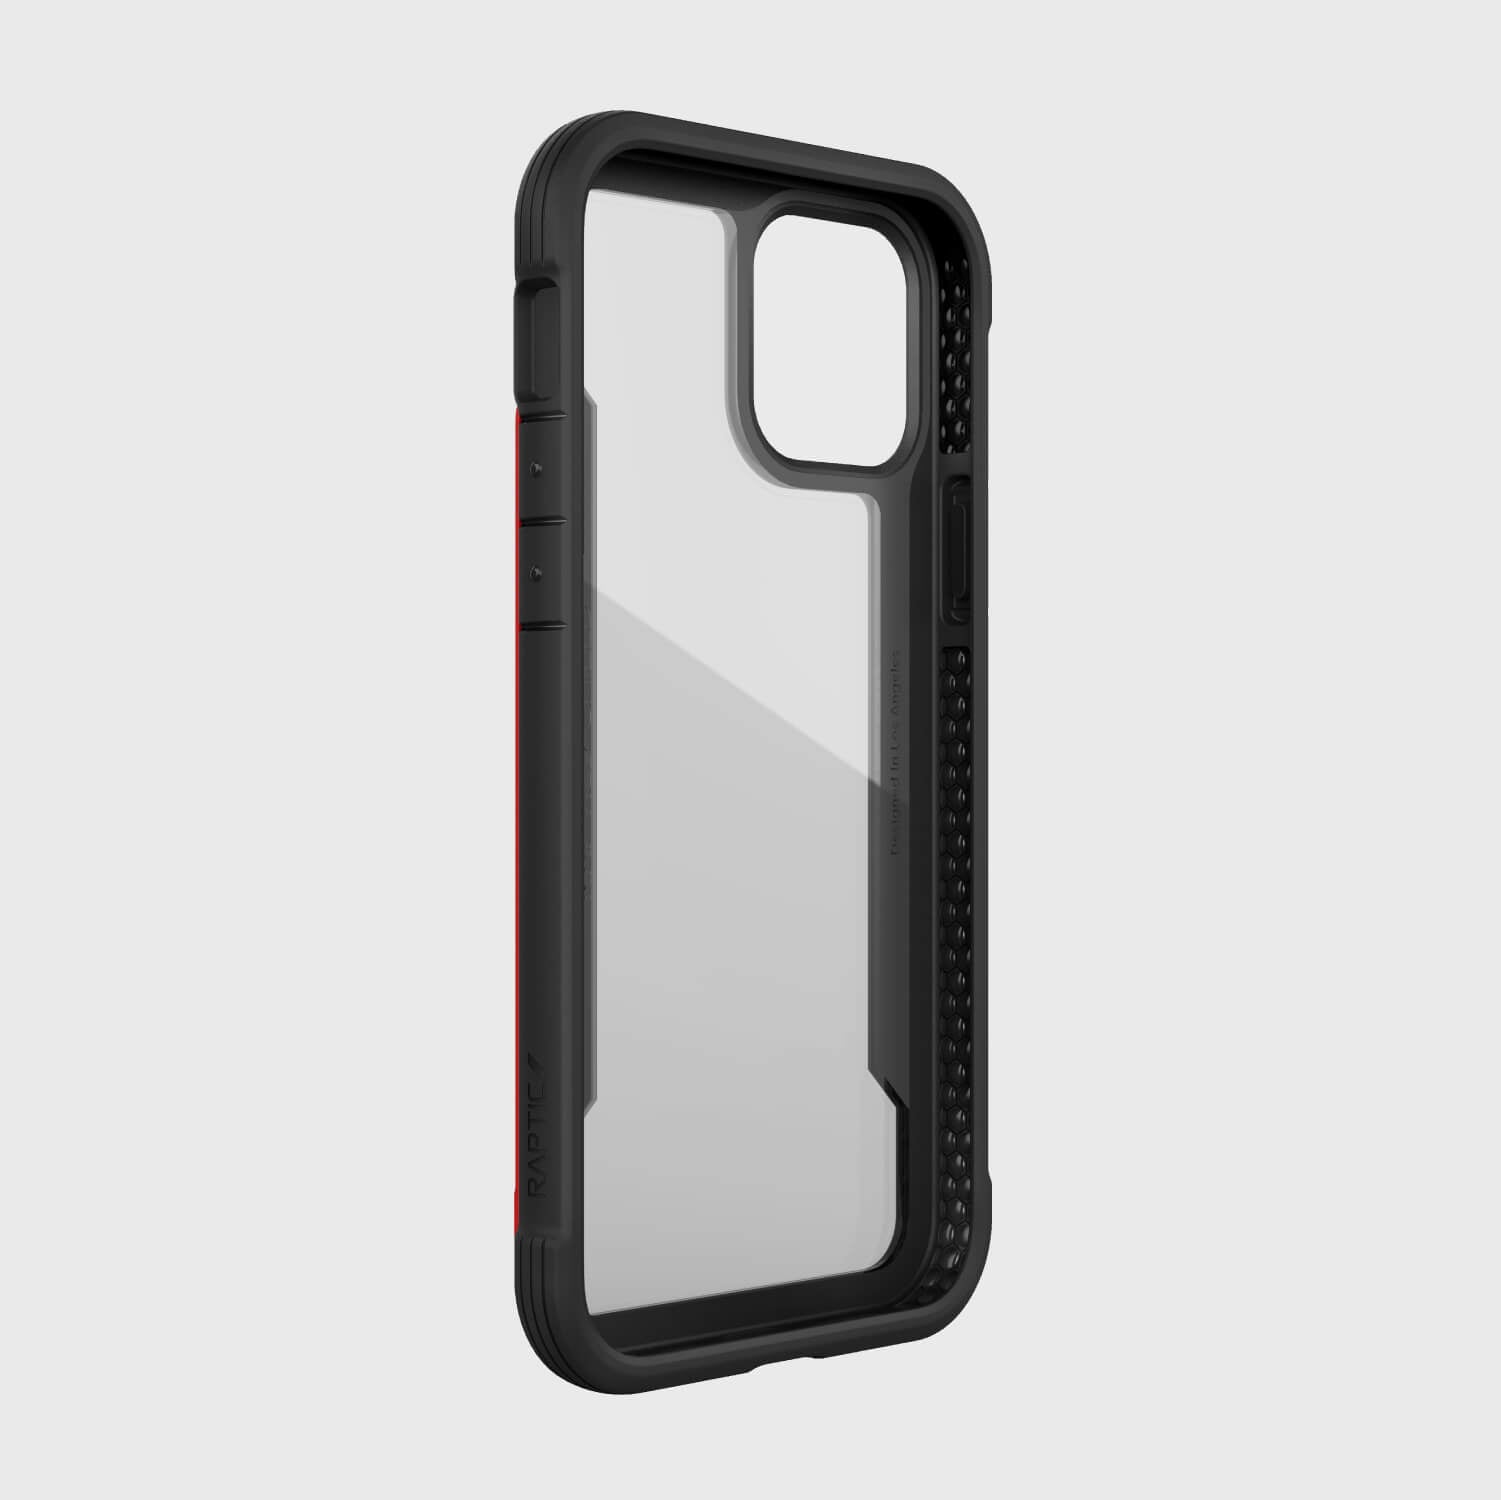 The SHIELD case for iPhone 12 Pro Max provides foot drop protection and comes in a stylish black and red design.